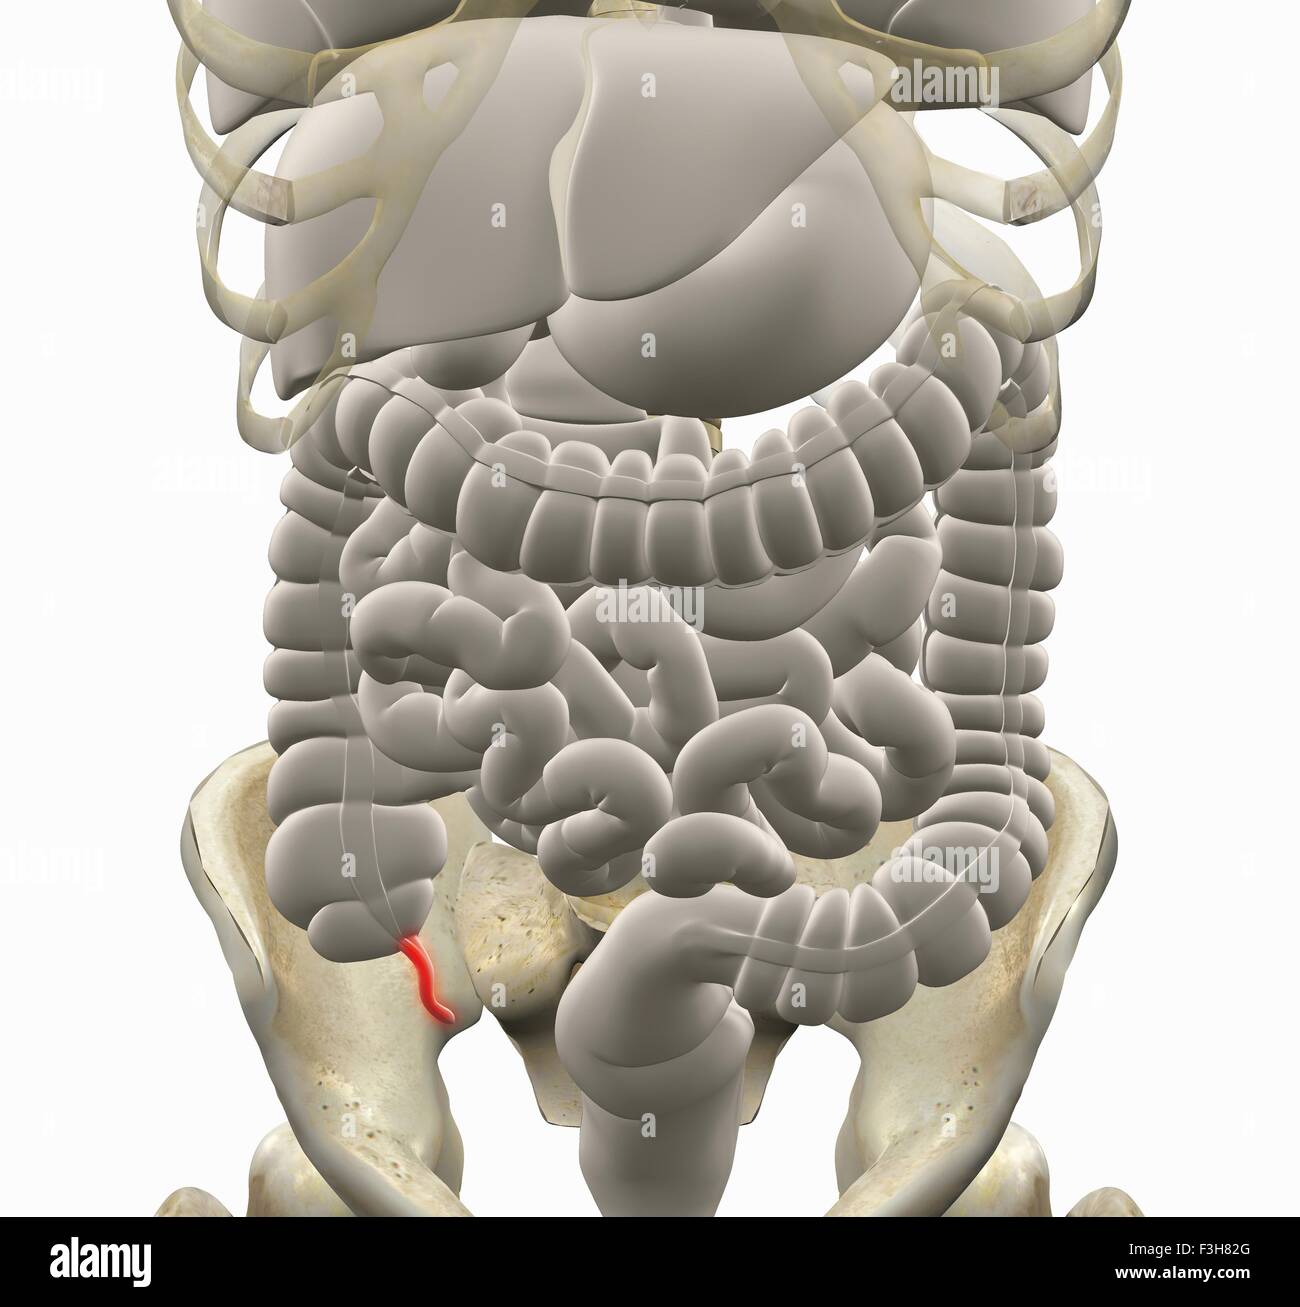 Illustration of gastrointestinal system with the appendix highlighted in red Stock Photo